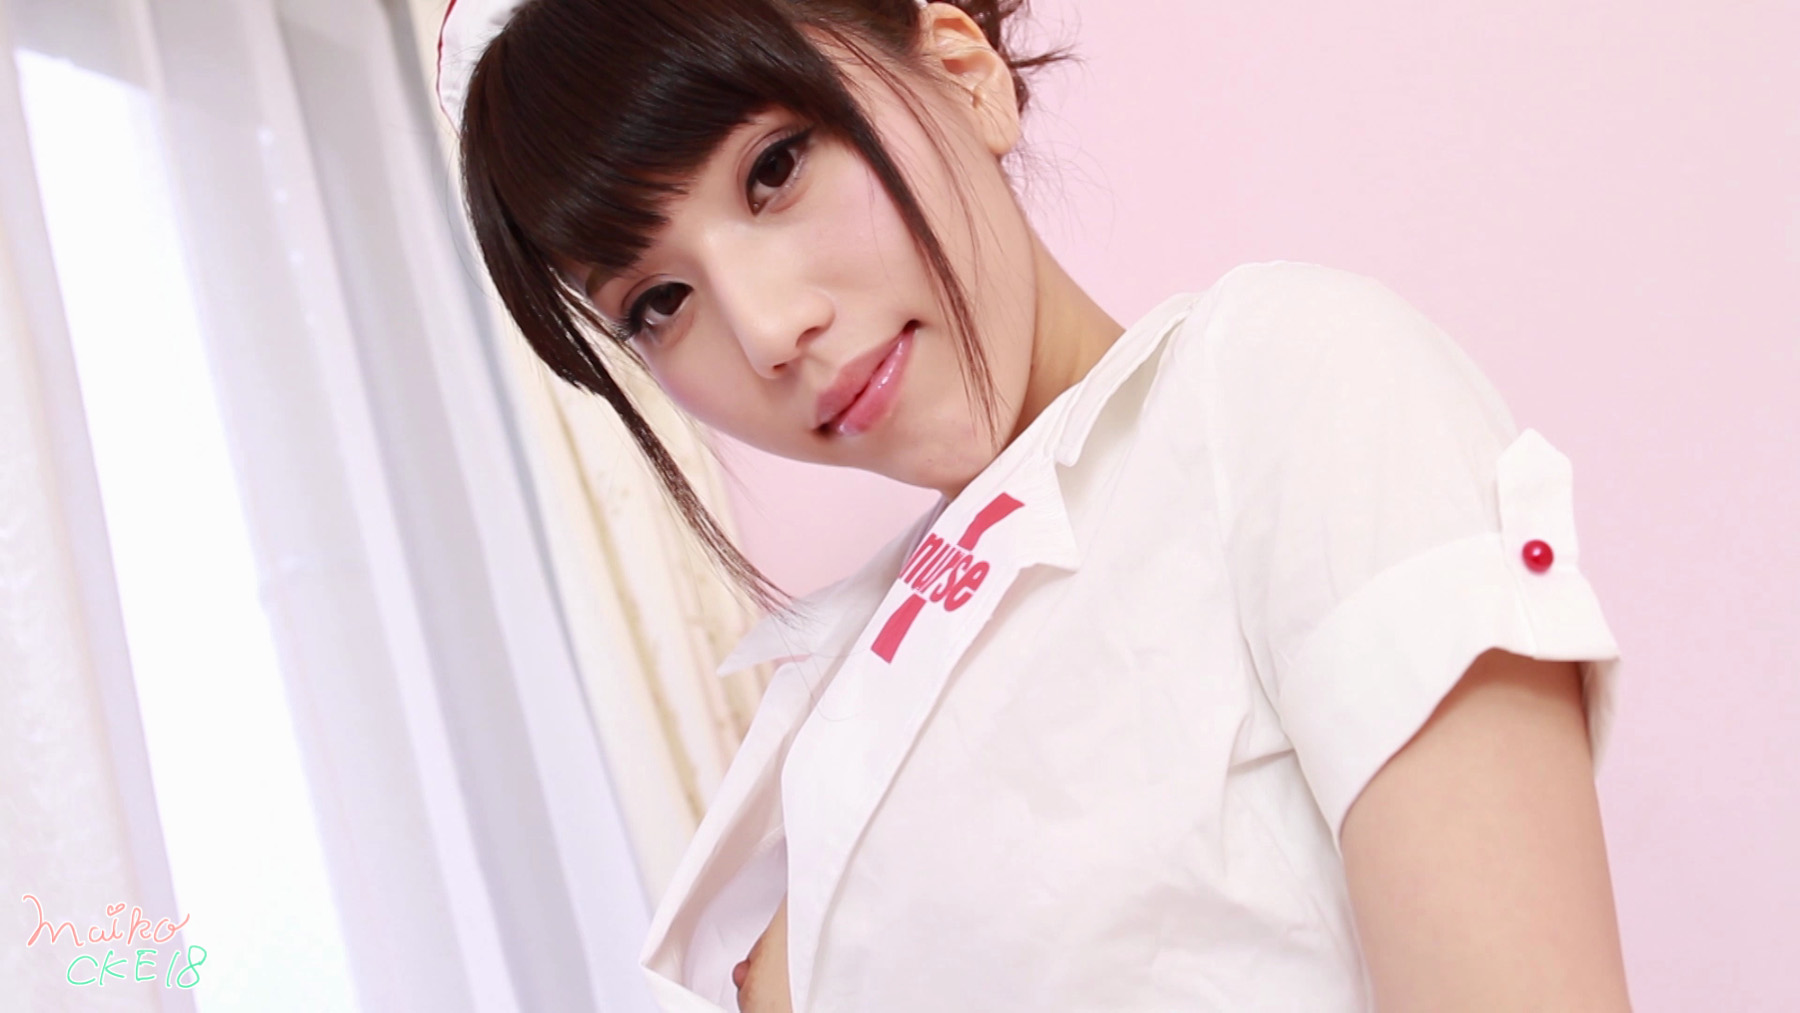 Japanese Cosplay Nurses - If you have a fetish for nurses or you are a Japanese cosplay fan, you will  absolutely love Maiko chan. She is wearing an open top and butterfly thong!